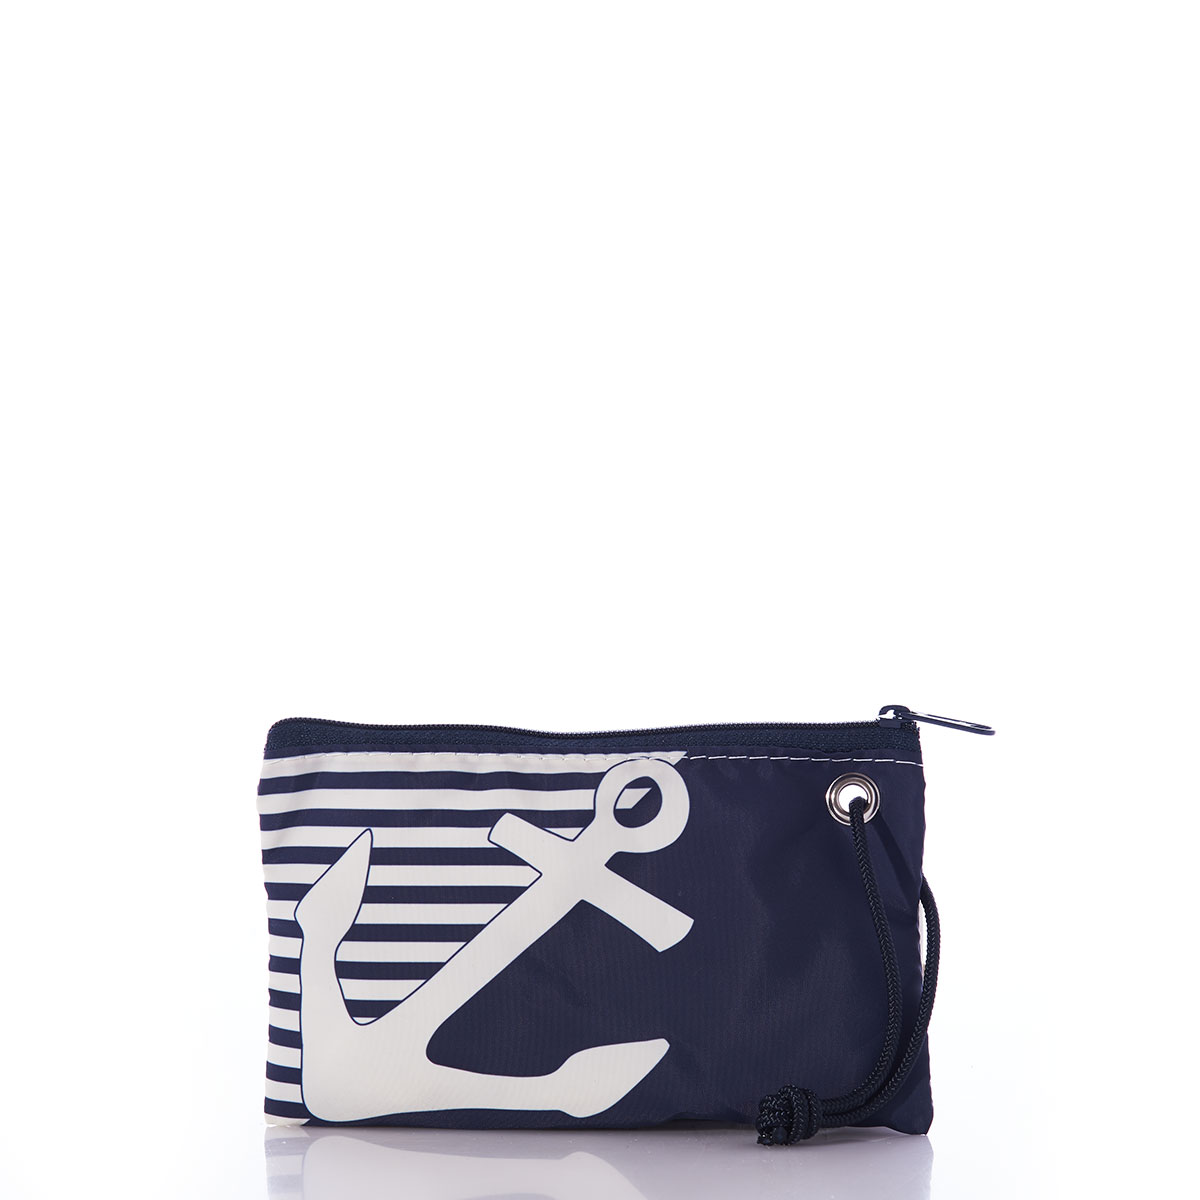 the breton stripe white anchor wristlet is embellished with a white anchor in front of a solid navy bottom corner and a navy and white striped top corner and a navy rope handles